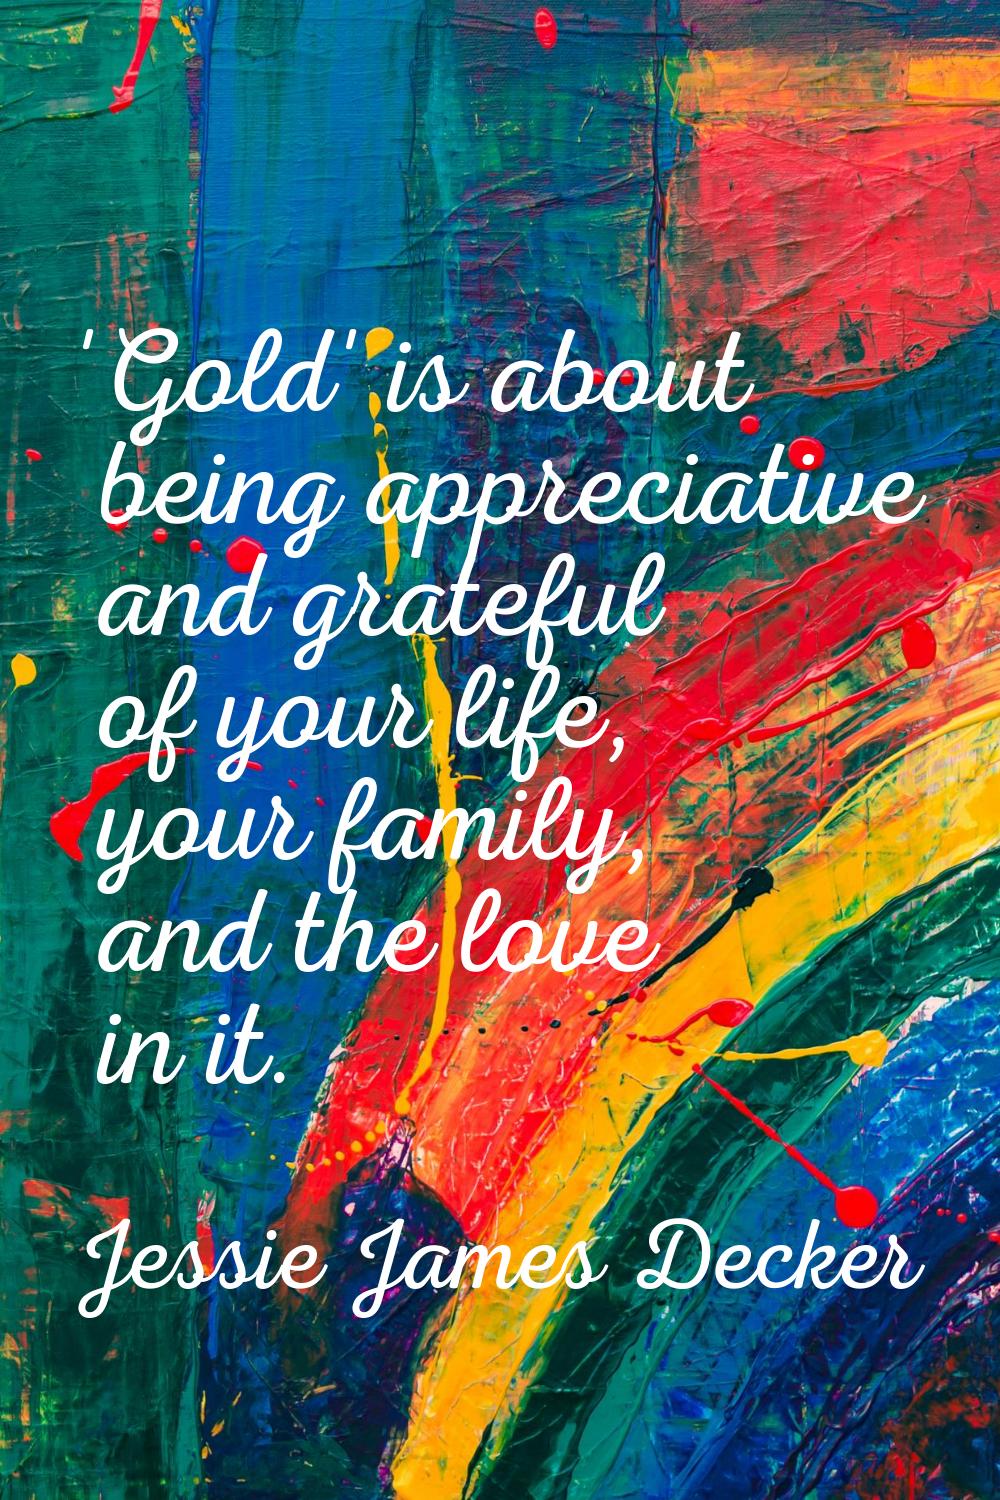 'Gold' is about being appreciative and grateful of your life, your family, and the love in it.